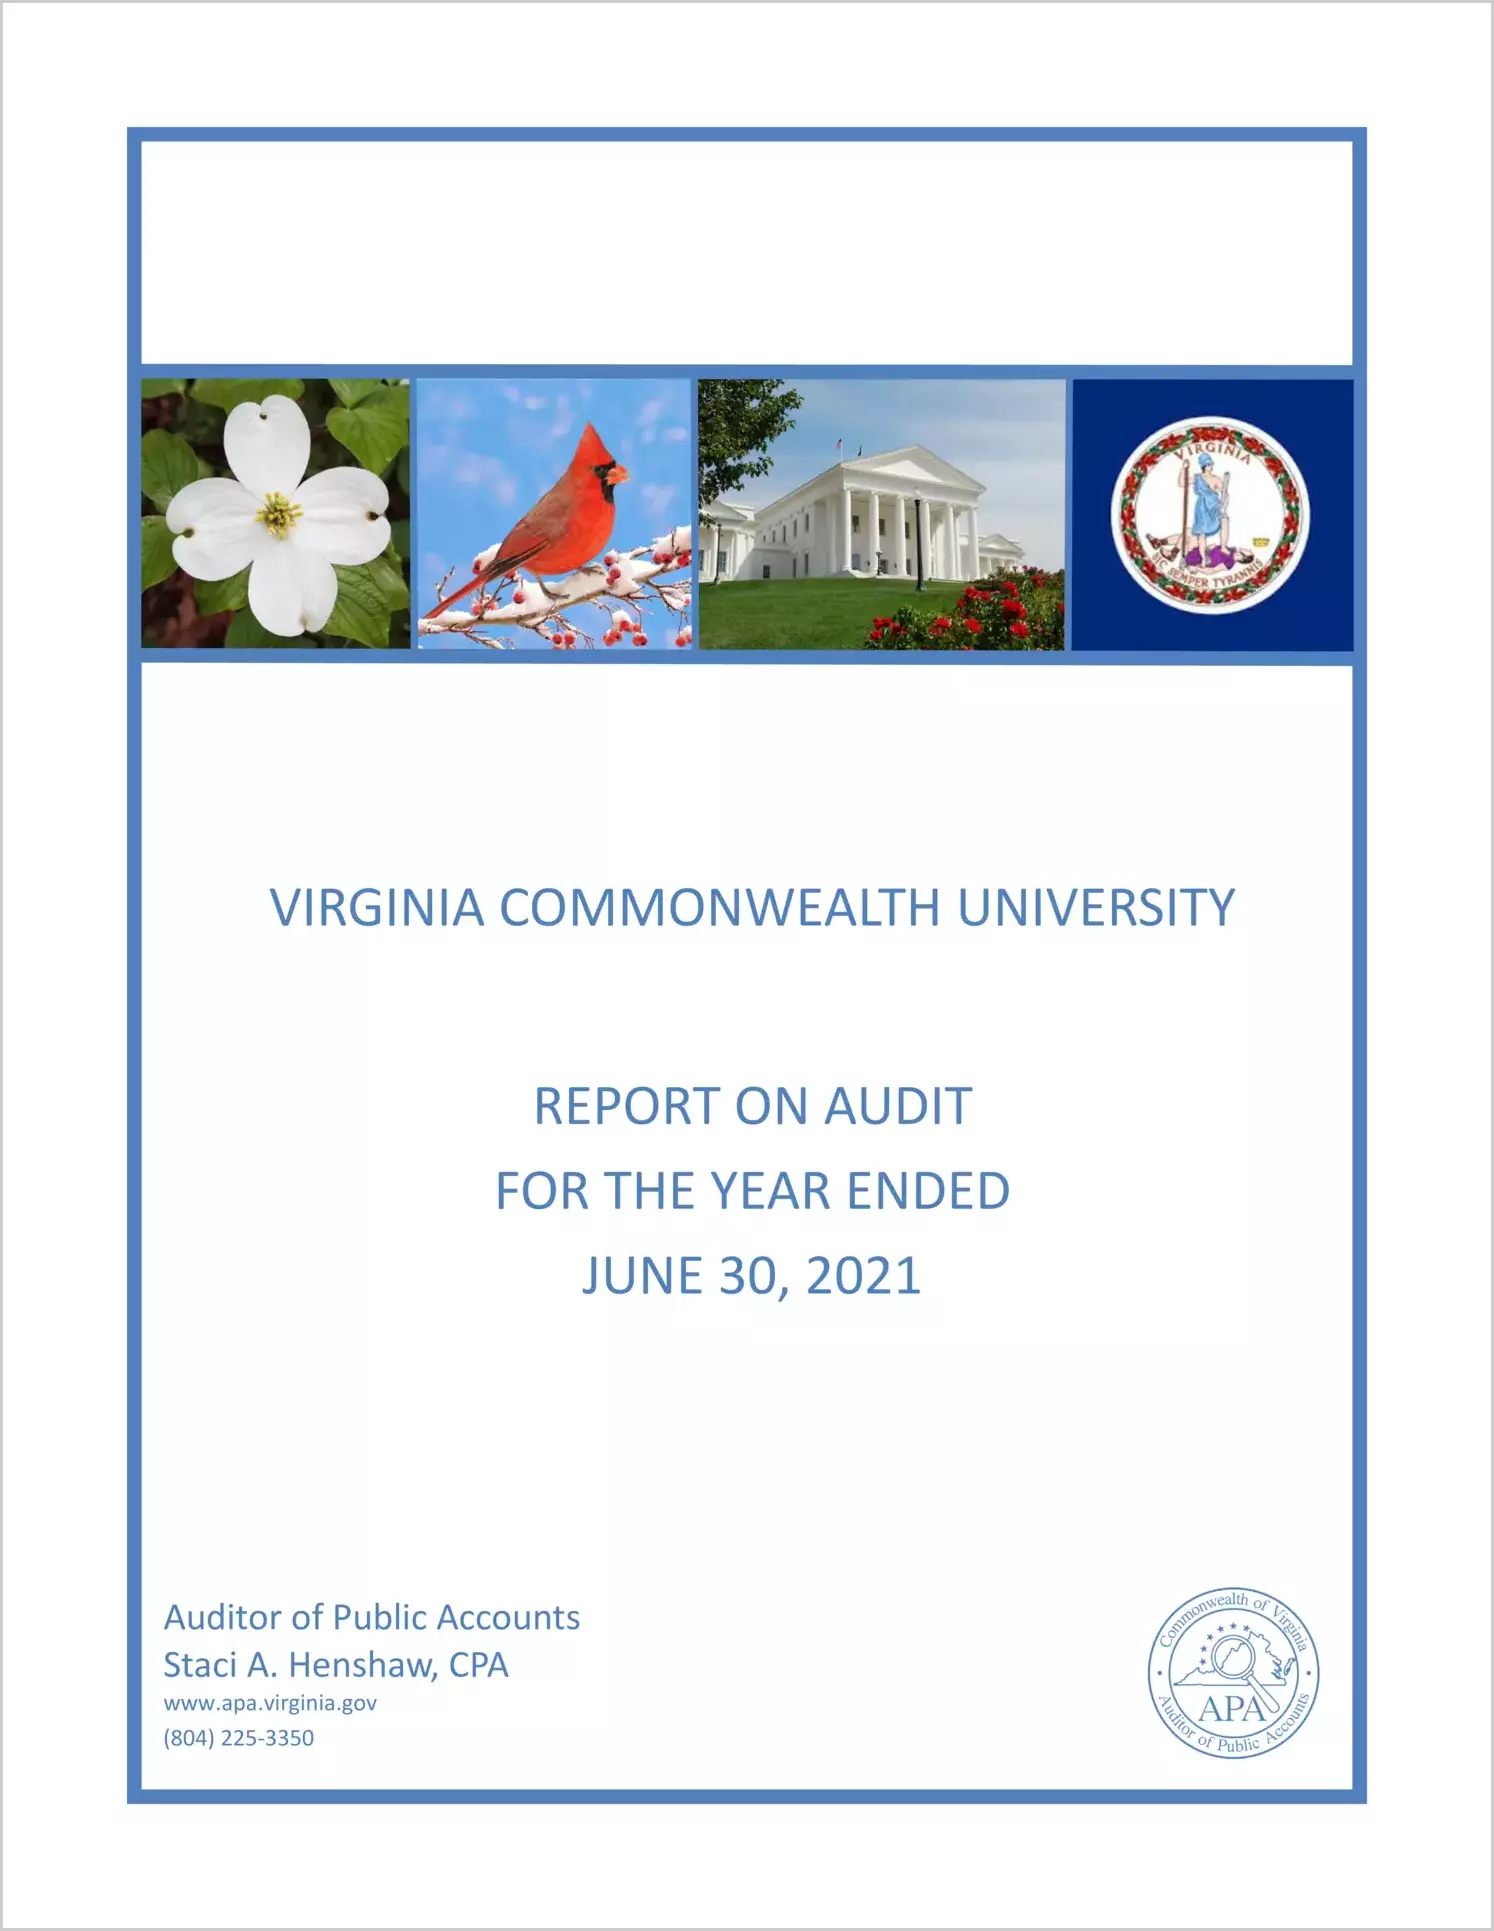 Virginia Commonwealth University for the year ended June 30, 2021